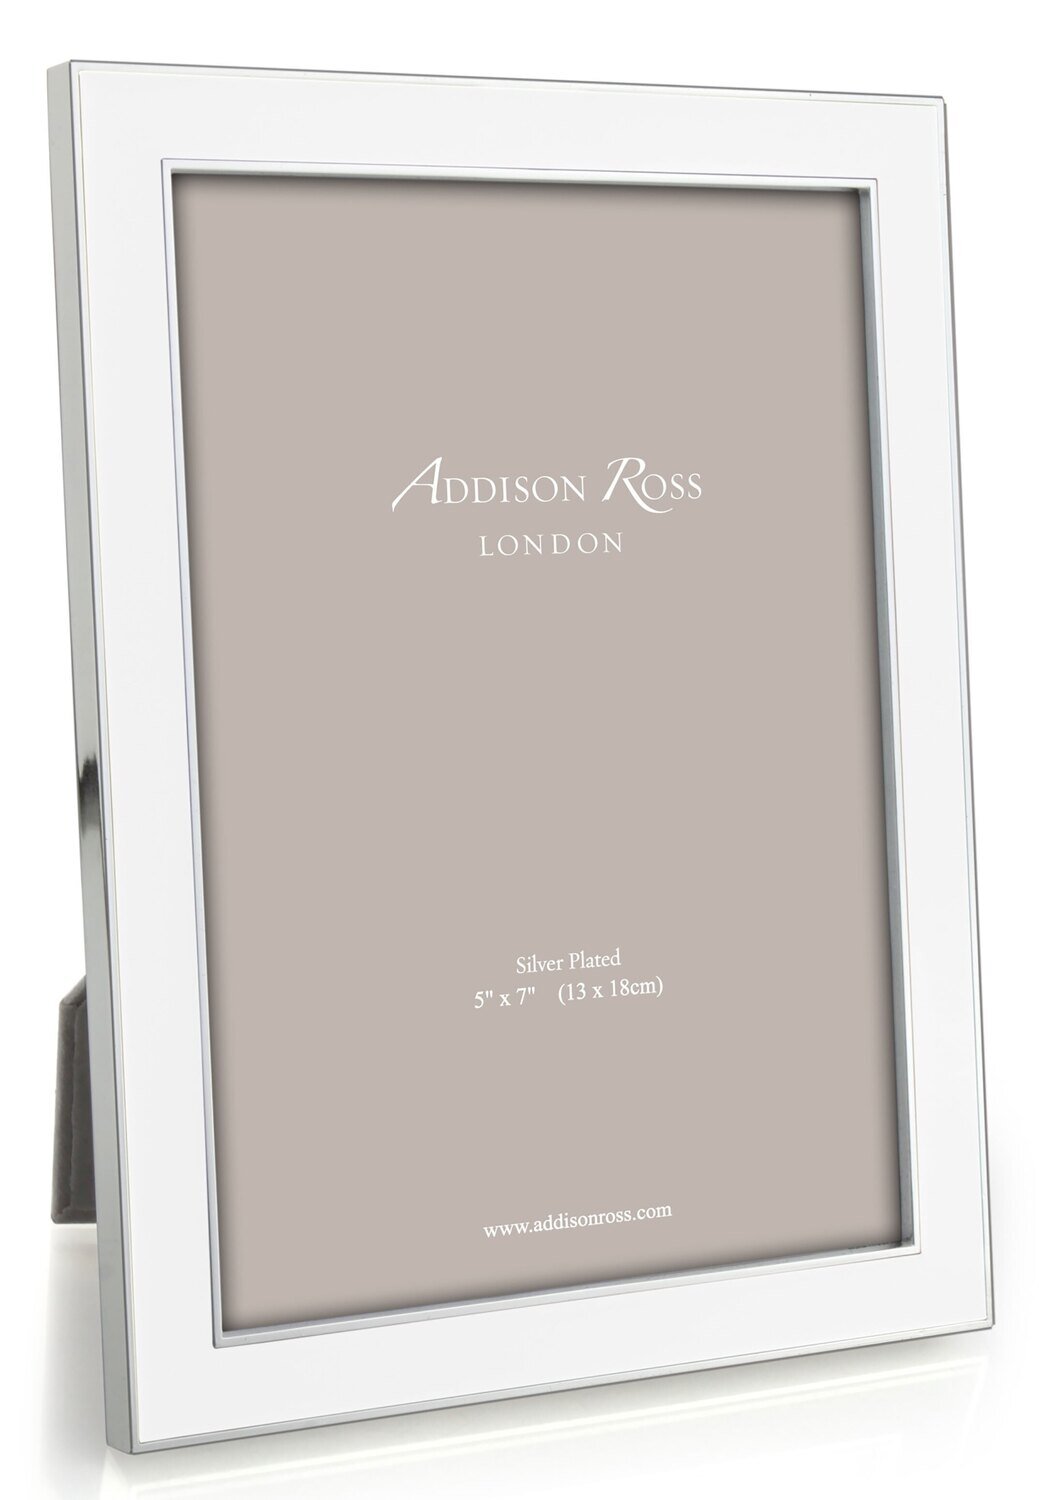 Addison Ross White Enamel Picture Frame 8 x 10 Inch Silver-plated FR0641